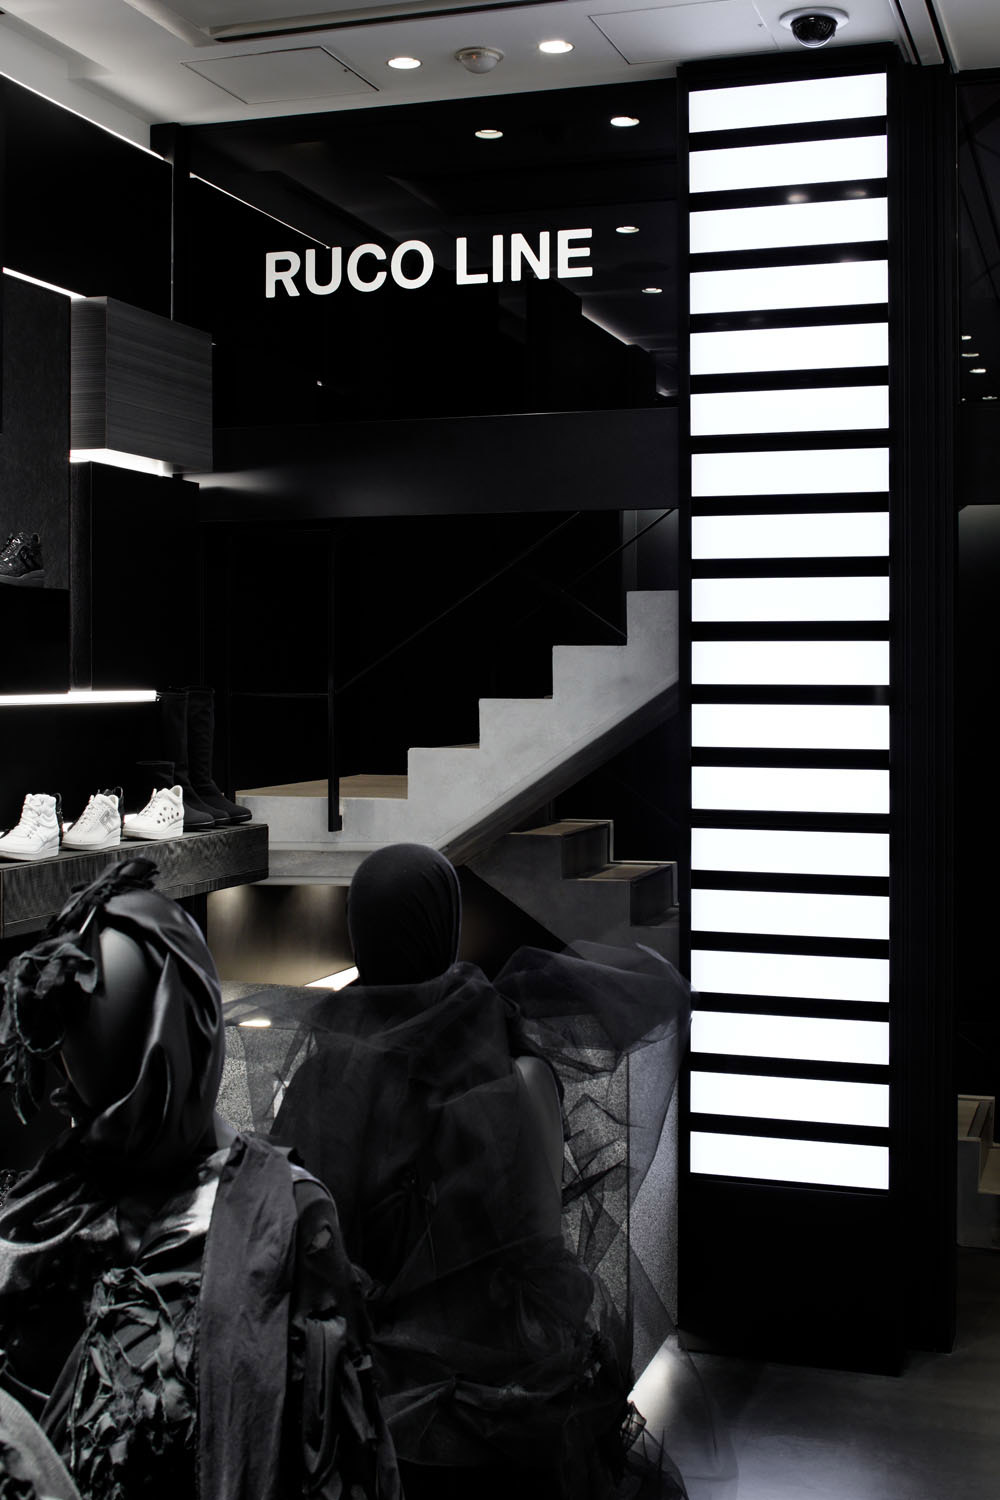 RUCO LINE